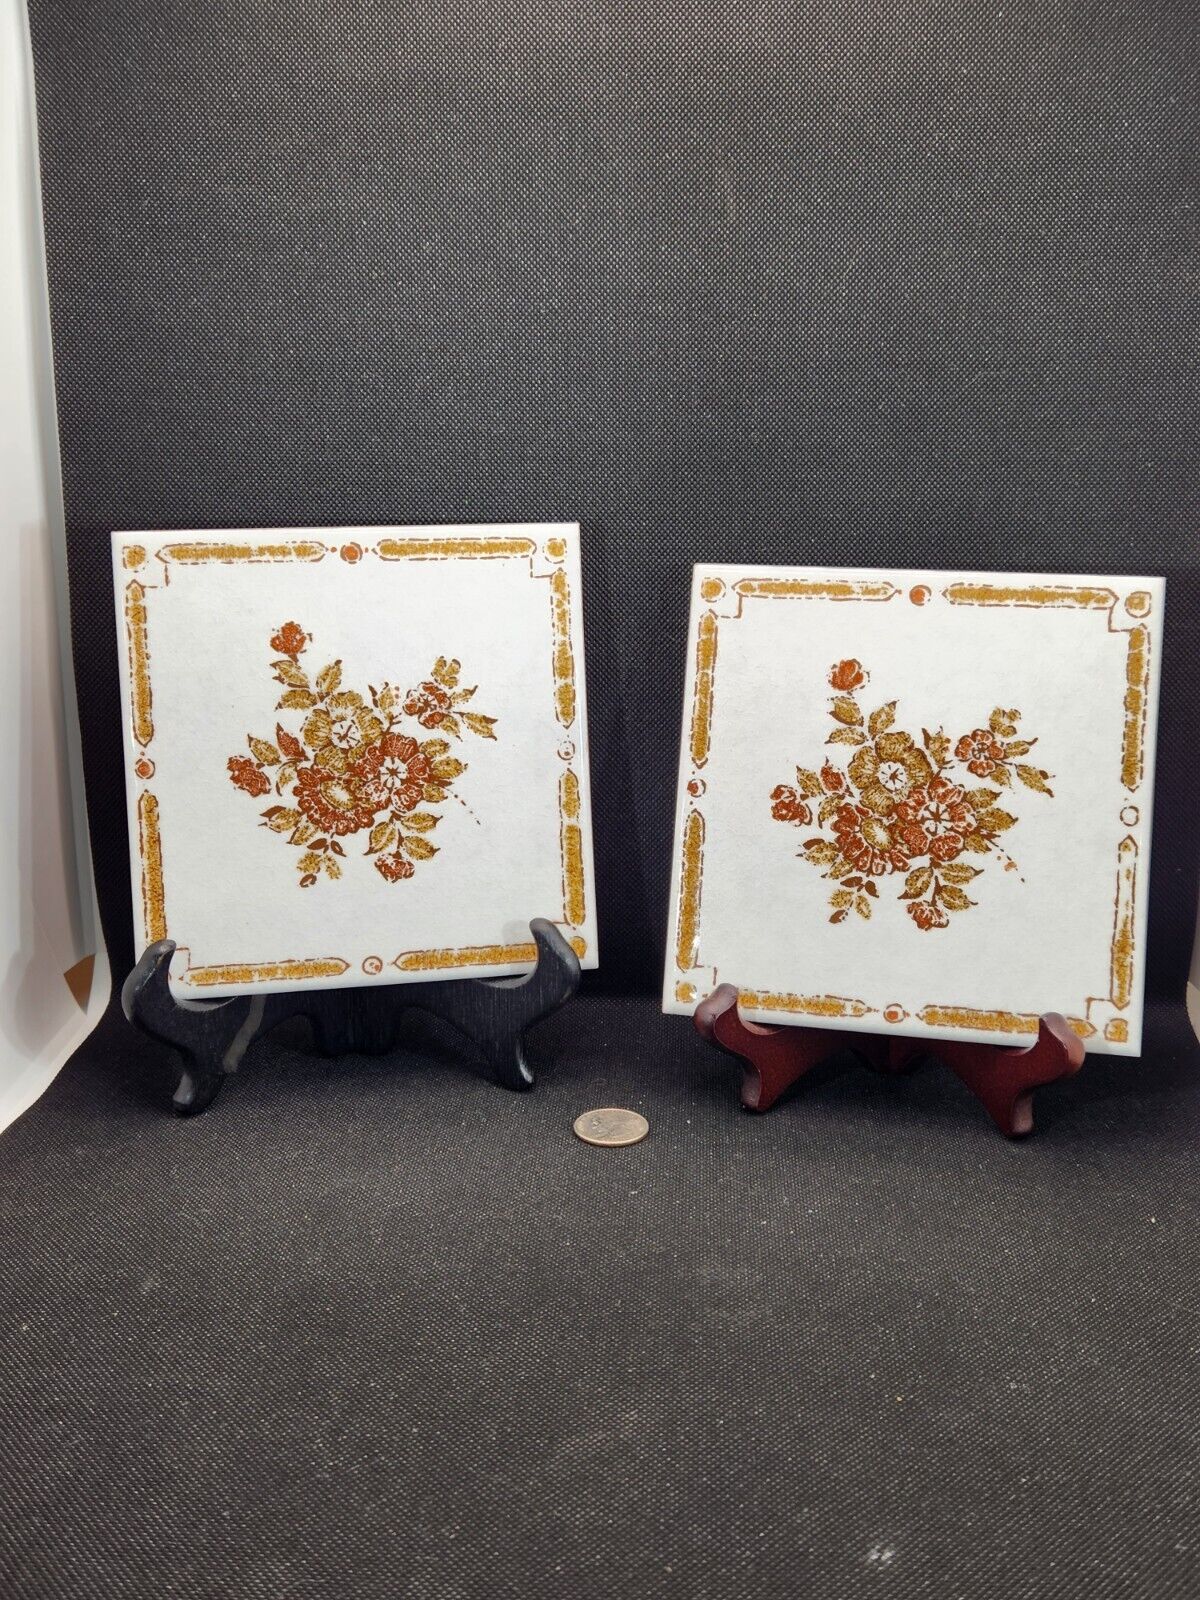 2 VTG 1960s Iris Cermica Italy Semigres Tiles Hand Painted Brown Flowers #427813